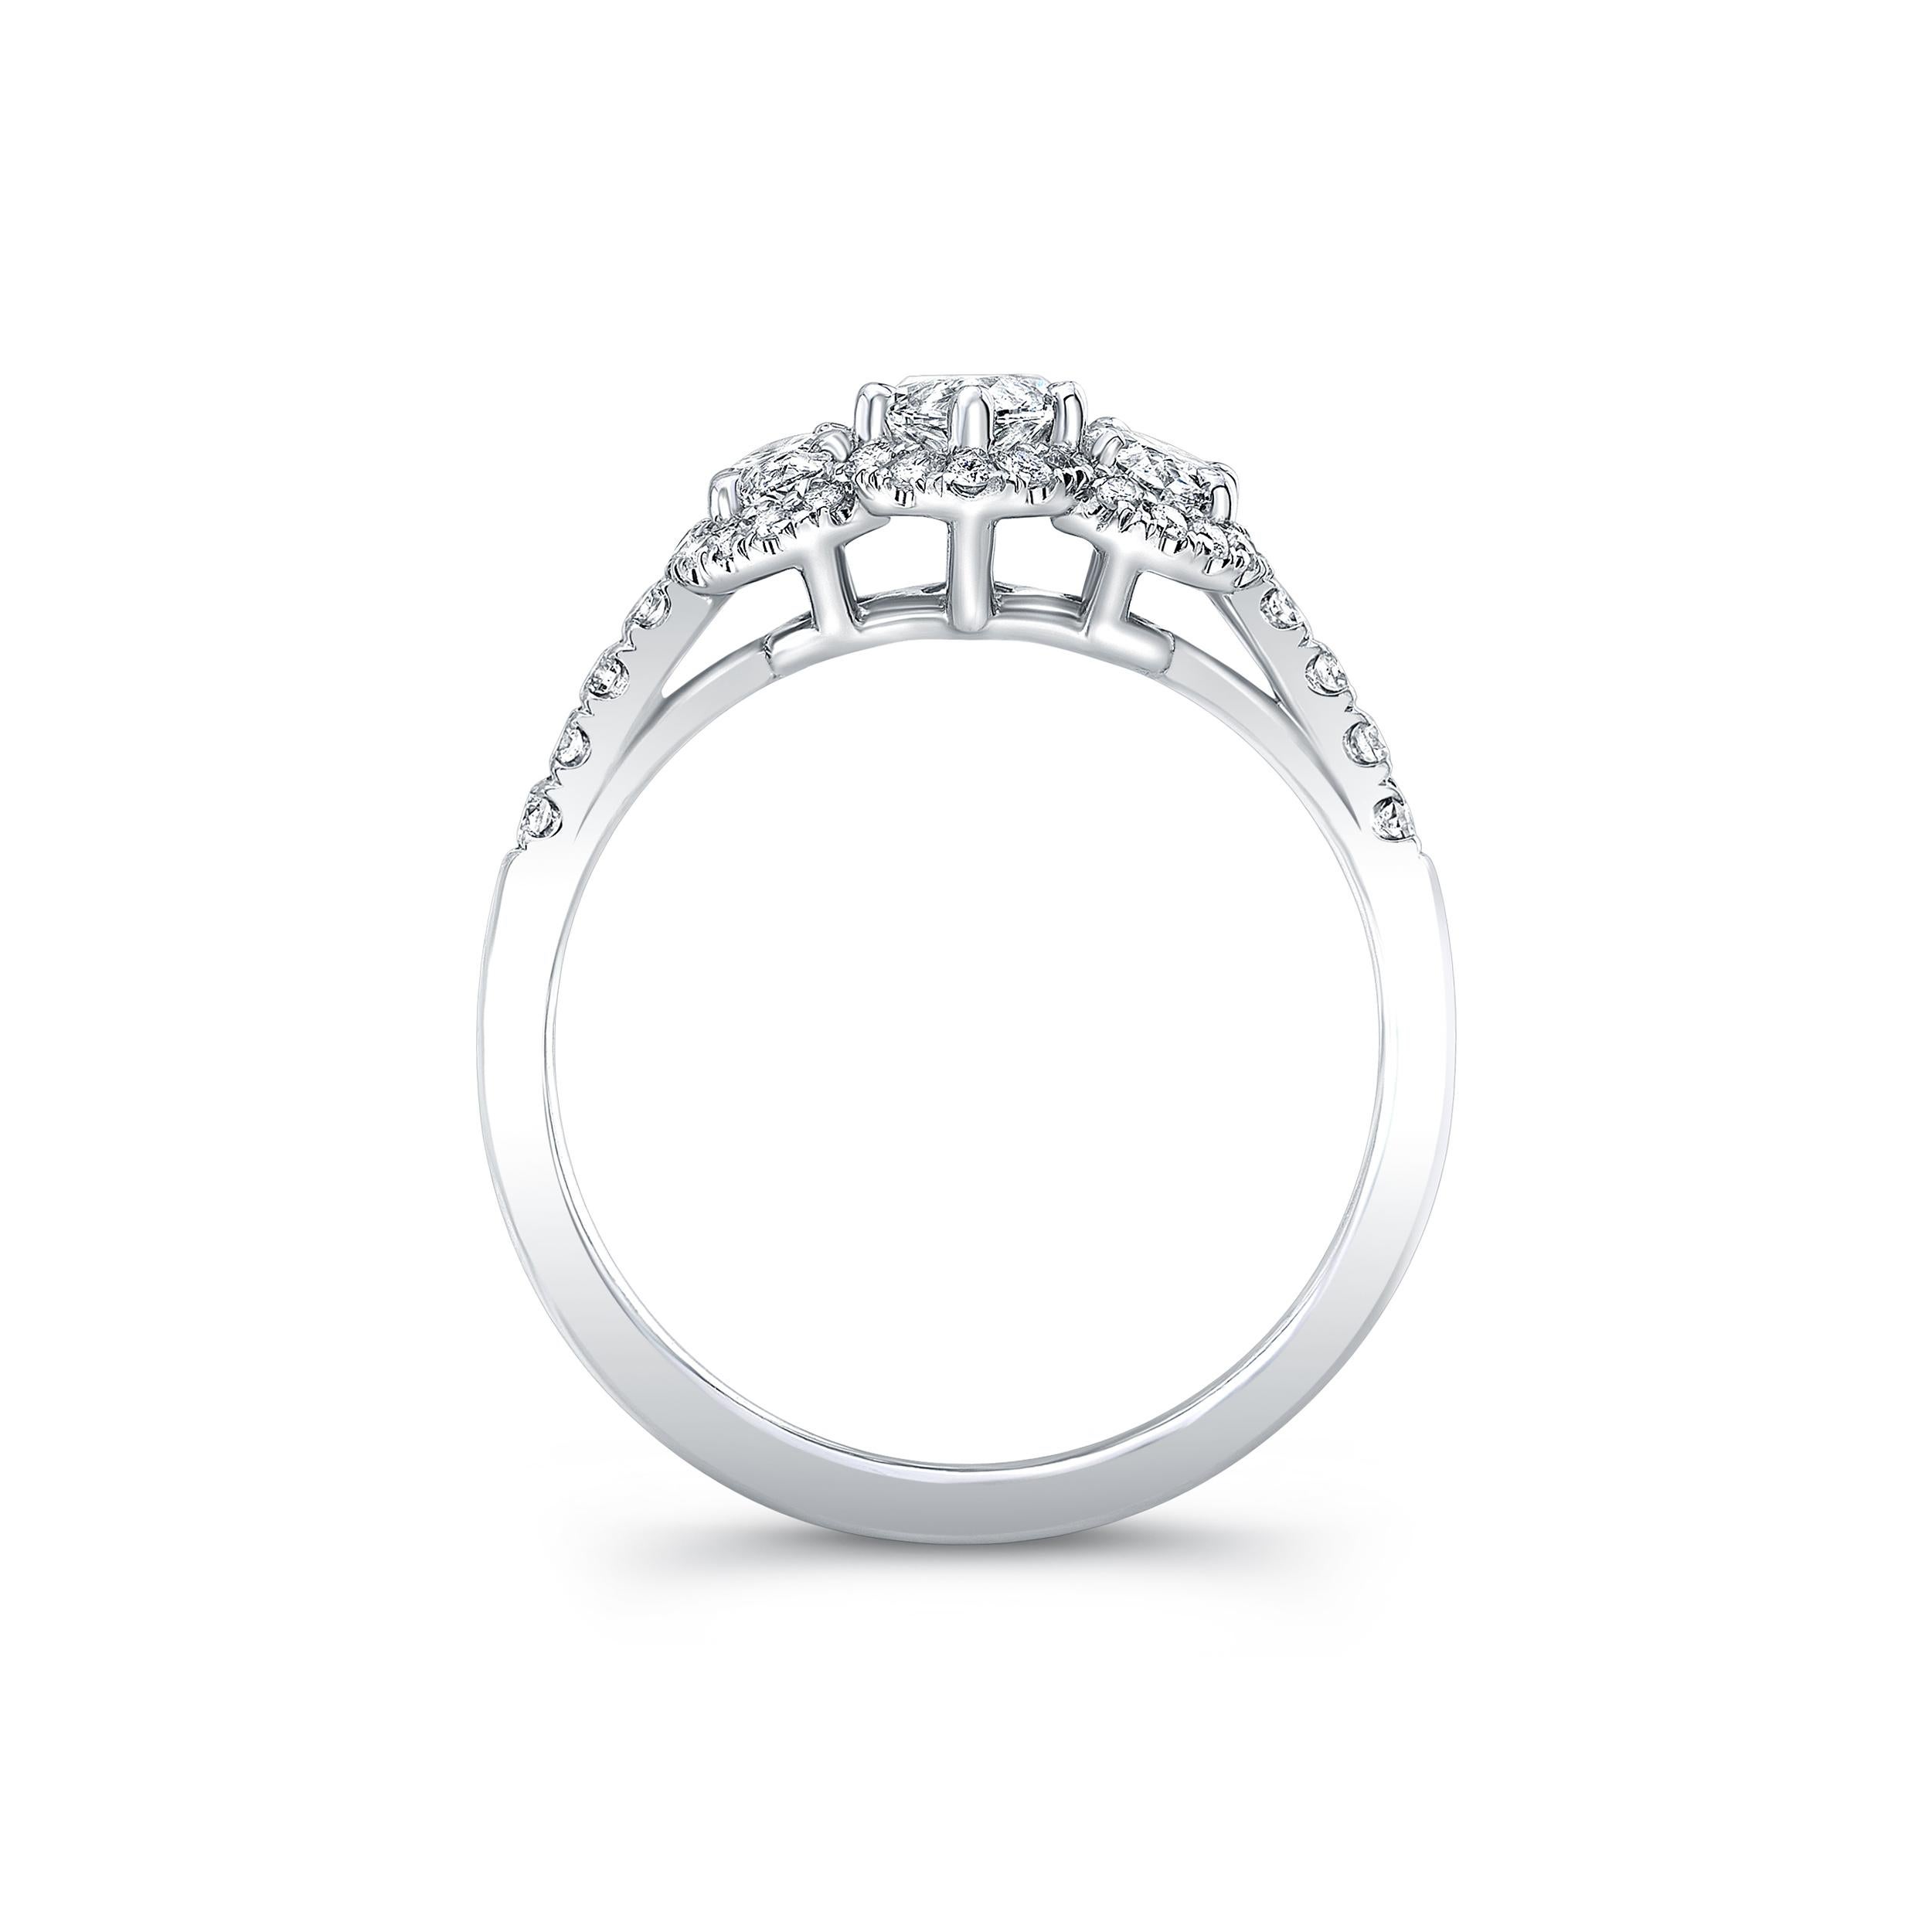 Center Stone - Marquise diamond 0.72 carat
Sidestones -    2 Marquise diamonds 0.70 carat total weight
Set in 18k white gold pavé ring
pavé diamonds - 0.30 total weight
AGS certified
Approximate Color G-H Clarity VS1-VS2
6.5 ring size